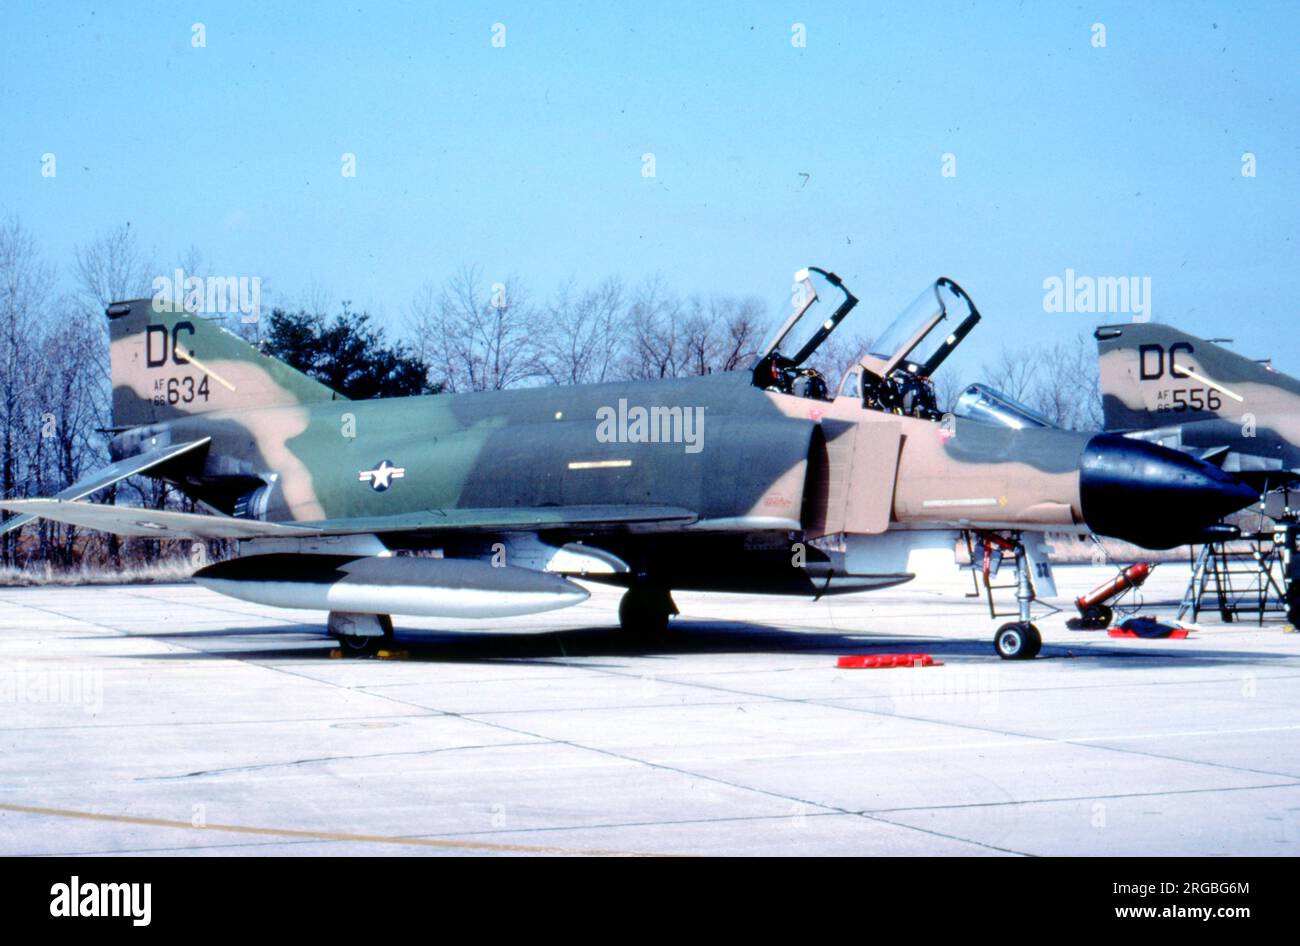 United States Air Force - McDonnell F-4D-30-MC Phantom 66-7634 (msn 2206, codice base DC), del 121st Tactical Fighter Squadron - 113rd Tactical Fighter Wing, Washington D.C. Air National Guard presso la base dell'aeronautica di Andrews, Maryland. Foto Stock